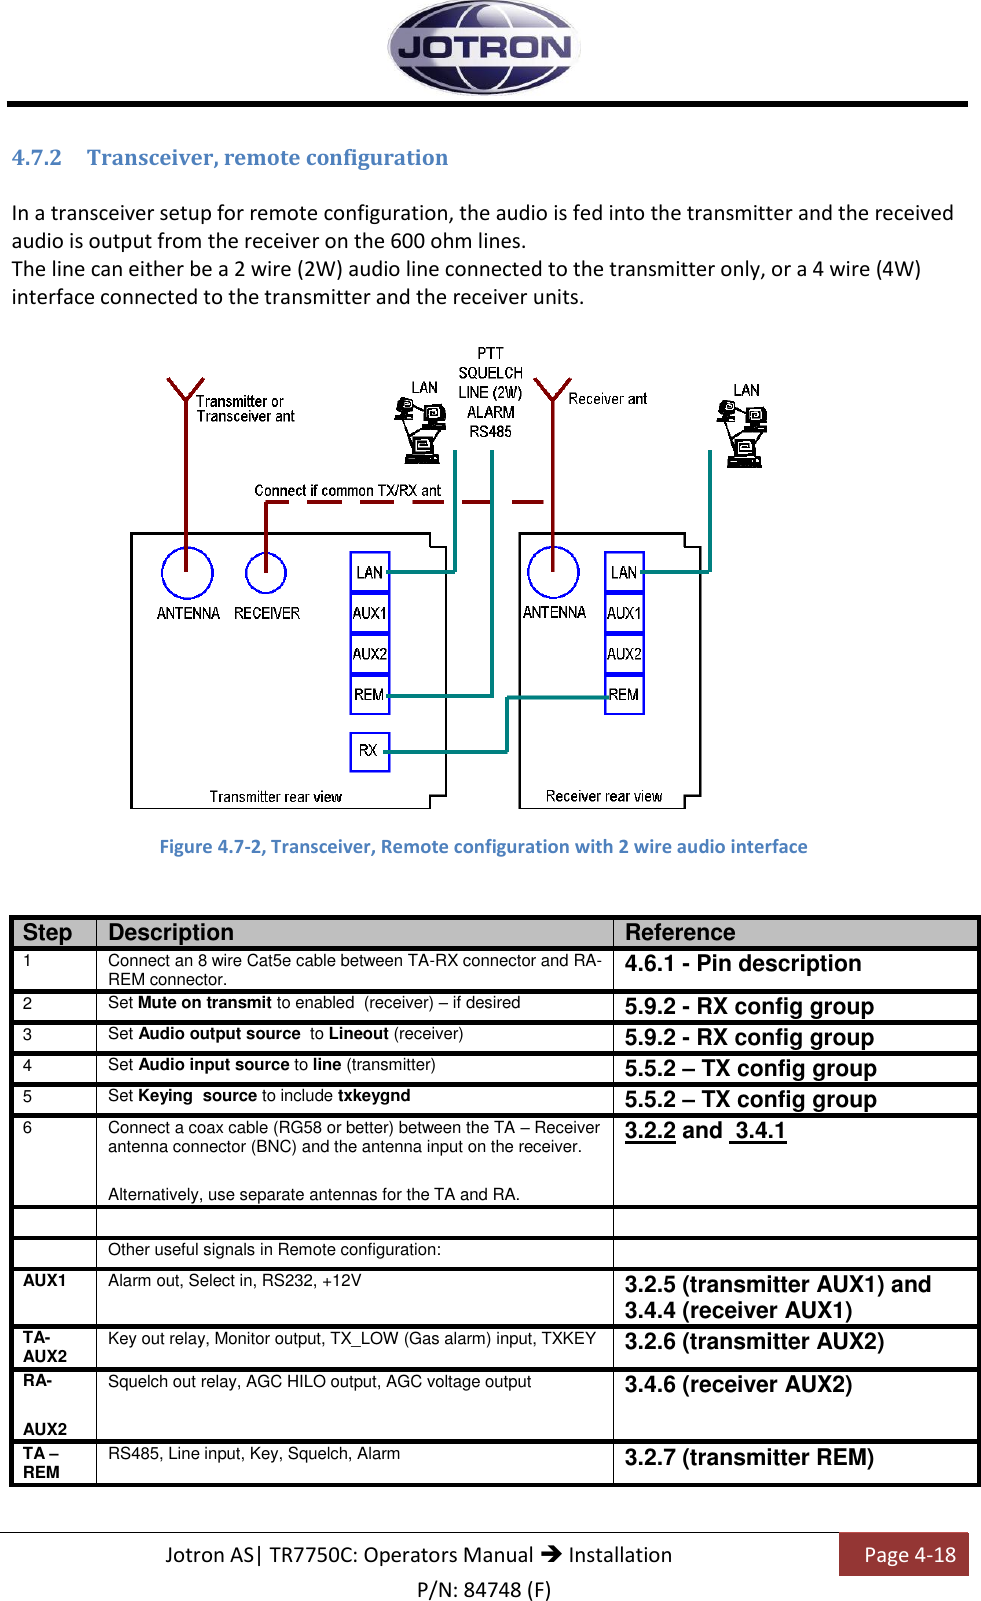   Jotron AS| TR7750C: Operators Manual  Installation Page 4-18 P/N: 84748 (F) 4.7.2 Transceiver, remote configuration  In a transceiver setup for remote configuration, the audio is fed into the transmitter and the received audio is output from the receiver on the 600 ohm lines. The line can either be a 2 wire (2W) audio line connected to the transmitter only, or a 4 wire (4W) interface connected to the transmitter and the receiver units.    Figure 4.7-2, Transceiver, Remote configuration with 2 wire audio interface   Step Description Reference 1 Connect an 8 wire Cat5e cable between TA-RX connector and RA-REM connector. 4.6.1 - Pin description 2 Set Mute on transmit to enabled  (receiver) – if desired 5.9.2 - RX config group 3 Set Audio output source  to Lineout (receiver) 5.9.2 - RX config group 4 Set Audio input source to line (transmitter)  5.5.2 – TX config group 5 Set Keying  source to include txkeygnd 5.5.2 – TX config group 6 Connect a coax cable (RG58 or better) between the TA – Receiver antenna connector (BNC) and the antenna input on the receiver. Alternatively, use separate antennas for the TA and RA. 3.2.2 and  3.4.1     Other useful signals in Remote configuration:  AUX1 Alarm out, Select in, RS232, +12V 3.2.5 (transmitter AUX1) and 3.4.4 (receiver AUX1) TA-AUX2 Key out relay, Monitor output, TX_LOW (Gas alarm) input, TXKEY 3.2.6 (transmitter AUX2) RA- AUX2 Squelch out relay, AGC HILO output, AGC voltage output 3.4.6 (receiver AUX2) TA – REM RS485, Line input, Key, Squelch, Alarm 3.2.7 (transmitter REM)  